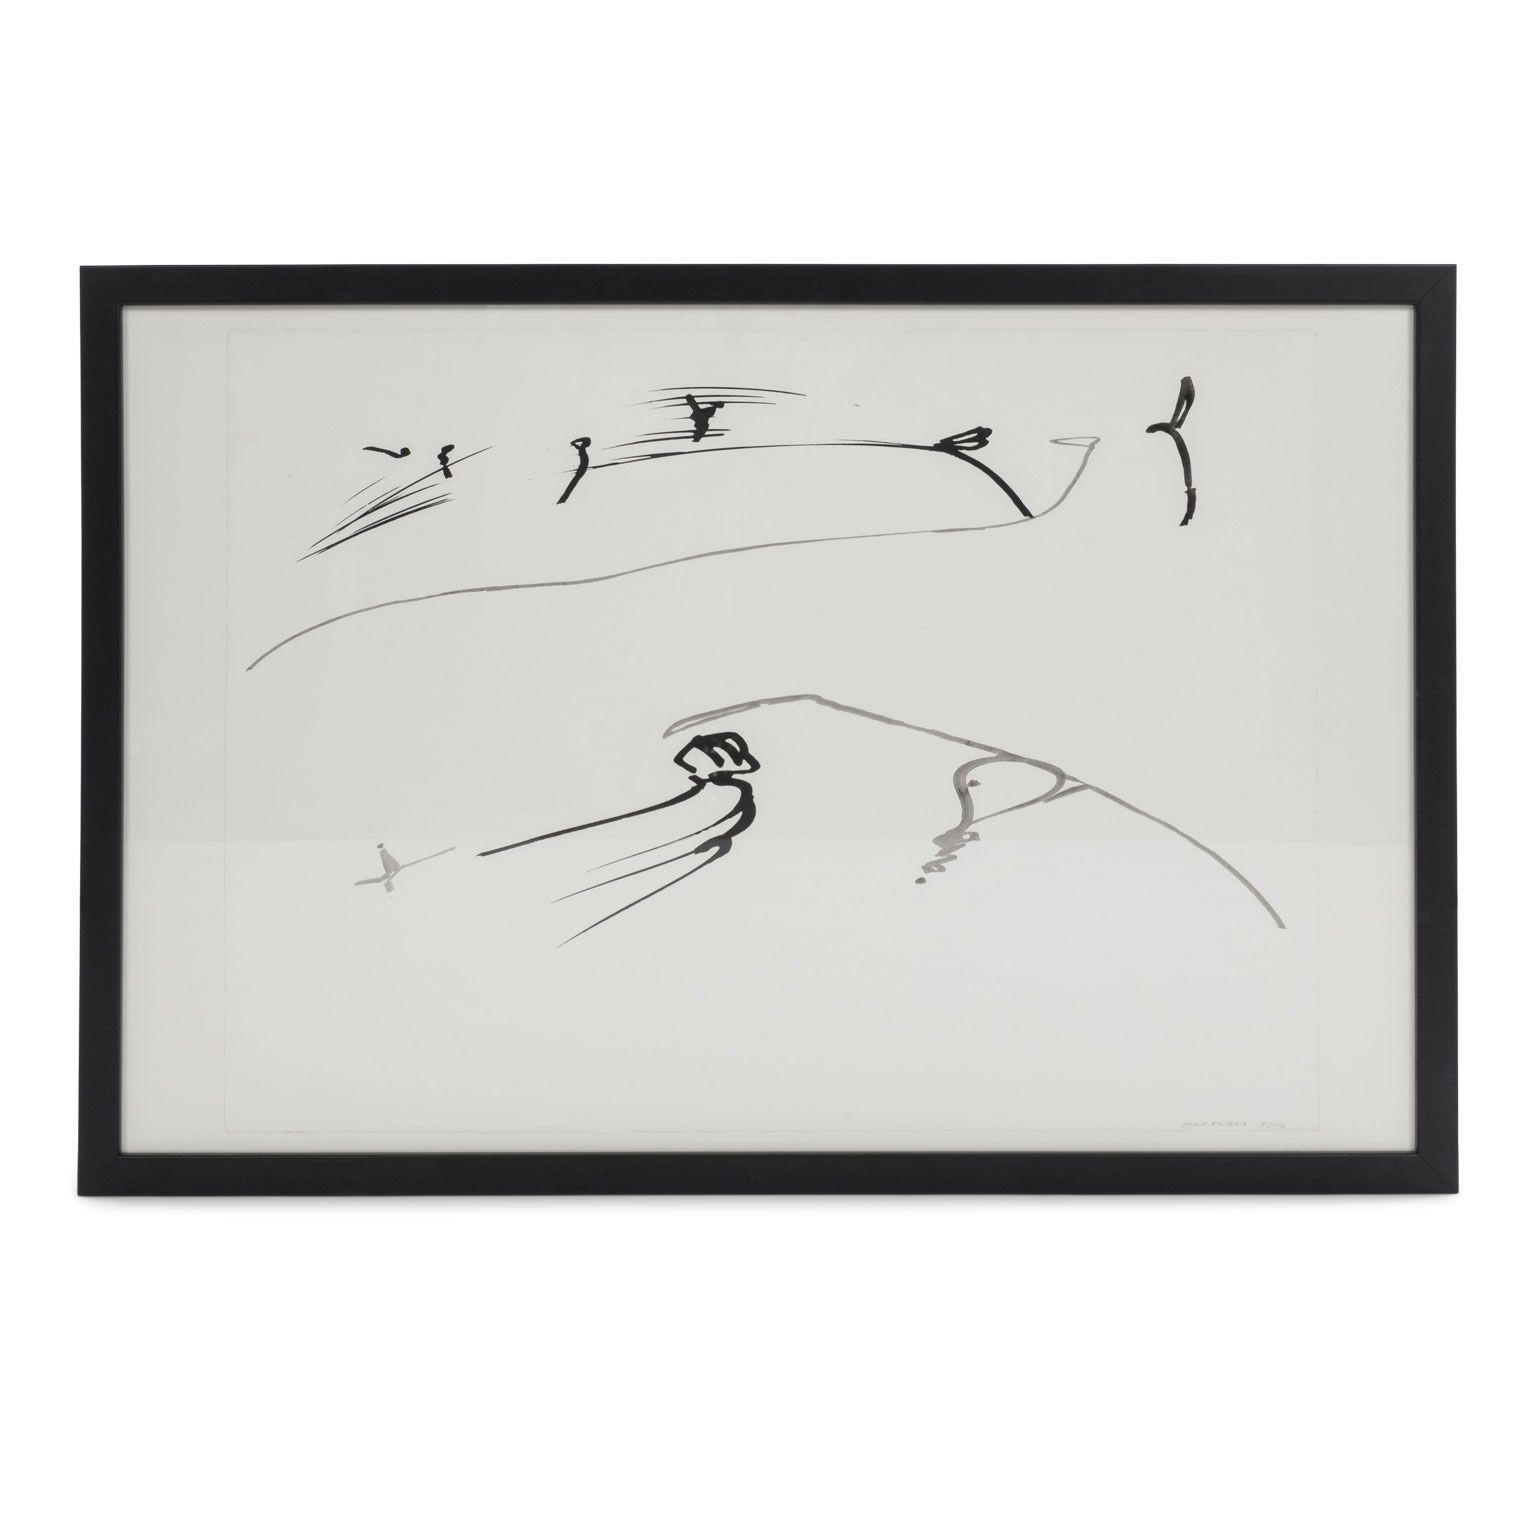 Minimalistic black-and-white abstract gestural ink-on-paper by Philip Renteria (1947-1998), 1976. Untitled brush and ink on paper, hand-signed by artist and newly-framed float-mounted within black metal frame. Two paintings available. Sold